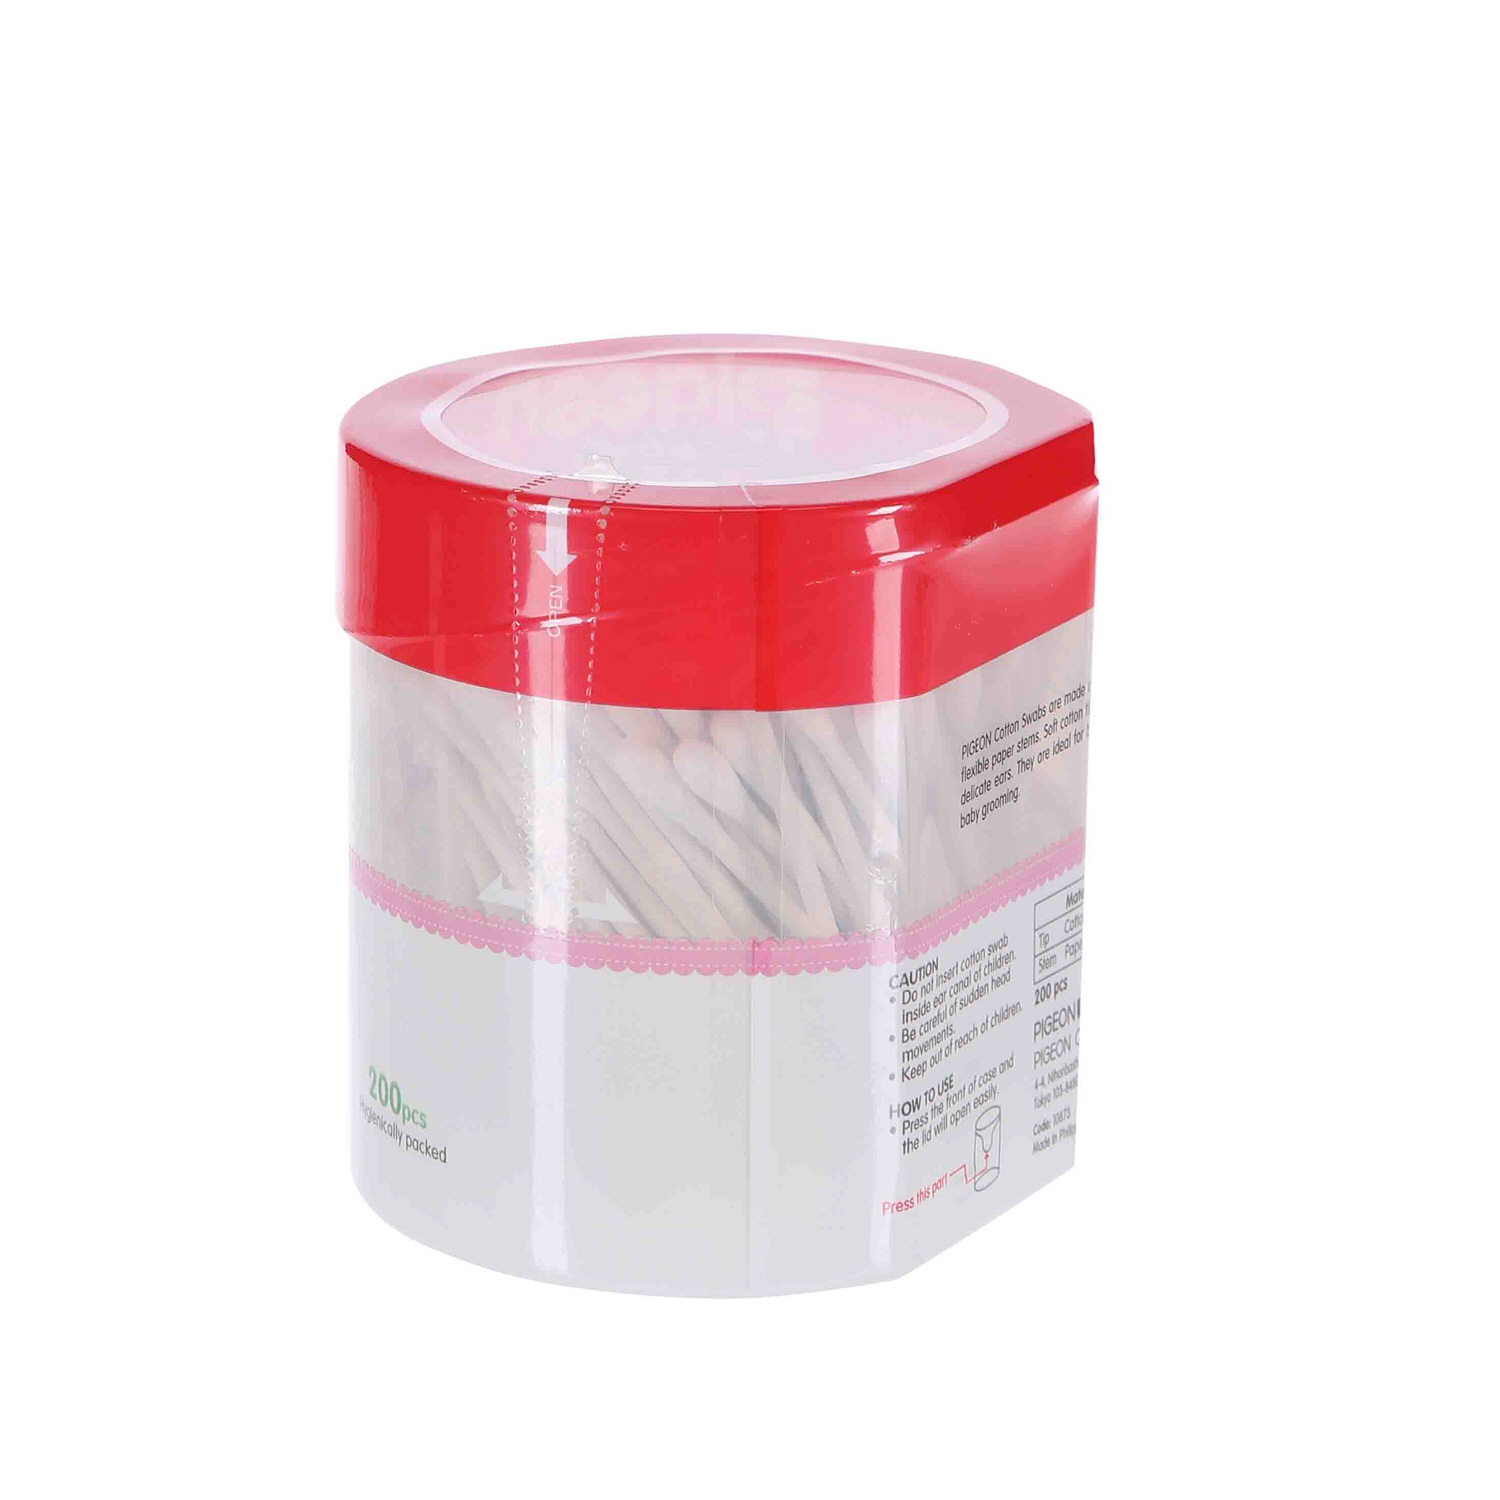 Pigeon Cotton Swabs Hinged Case 200 Pieces